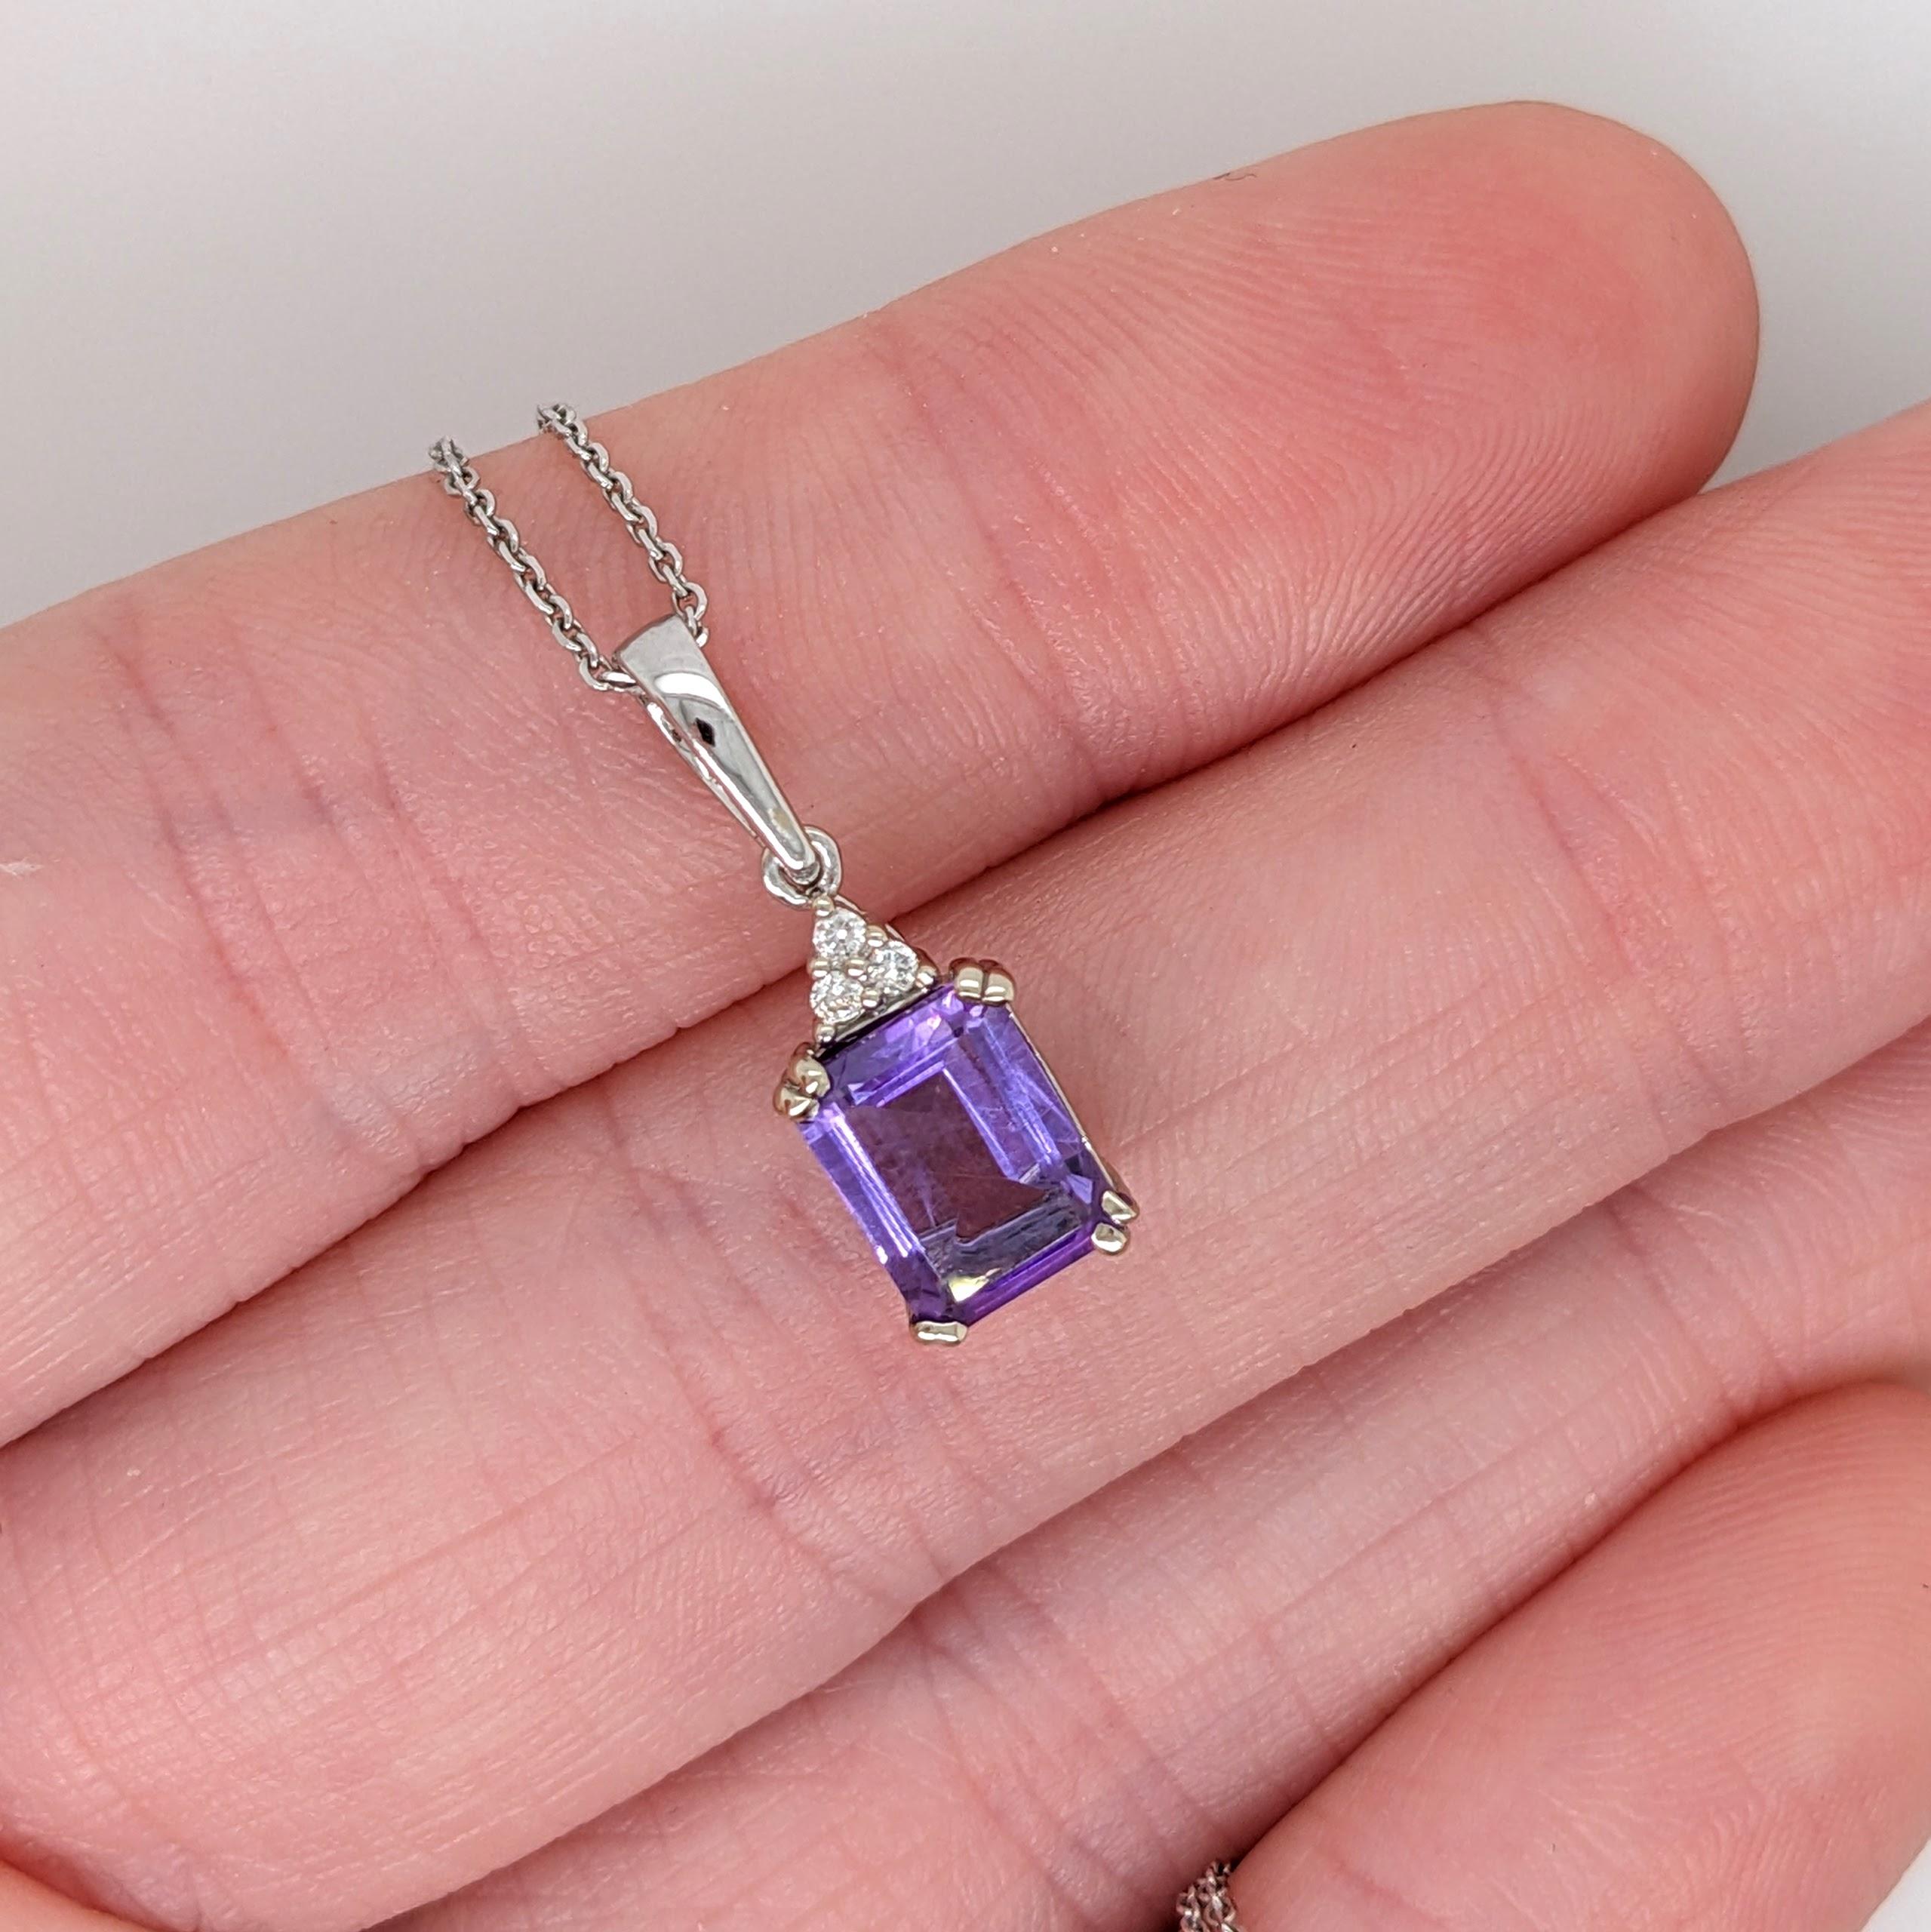 1.99ct Amethyst Pendant w Diamond Accents in Solid 14K White Gold Oval 8x6mm For Sale 2